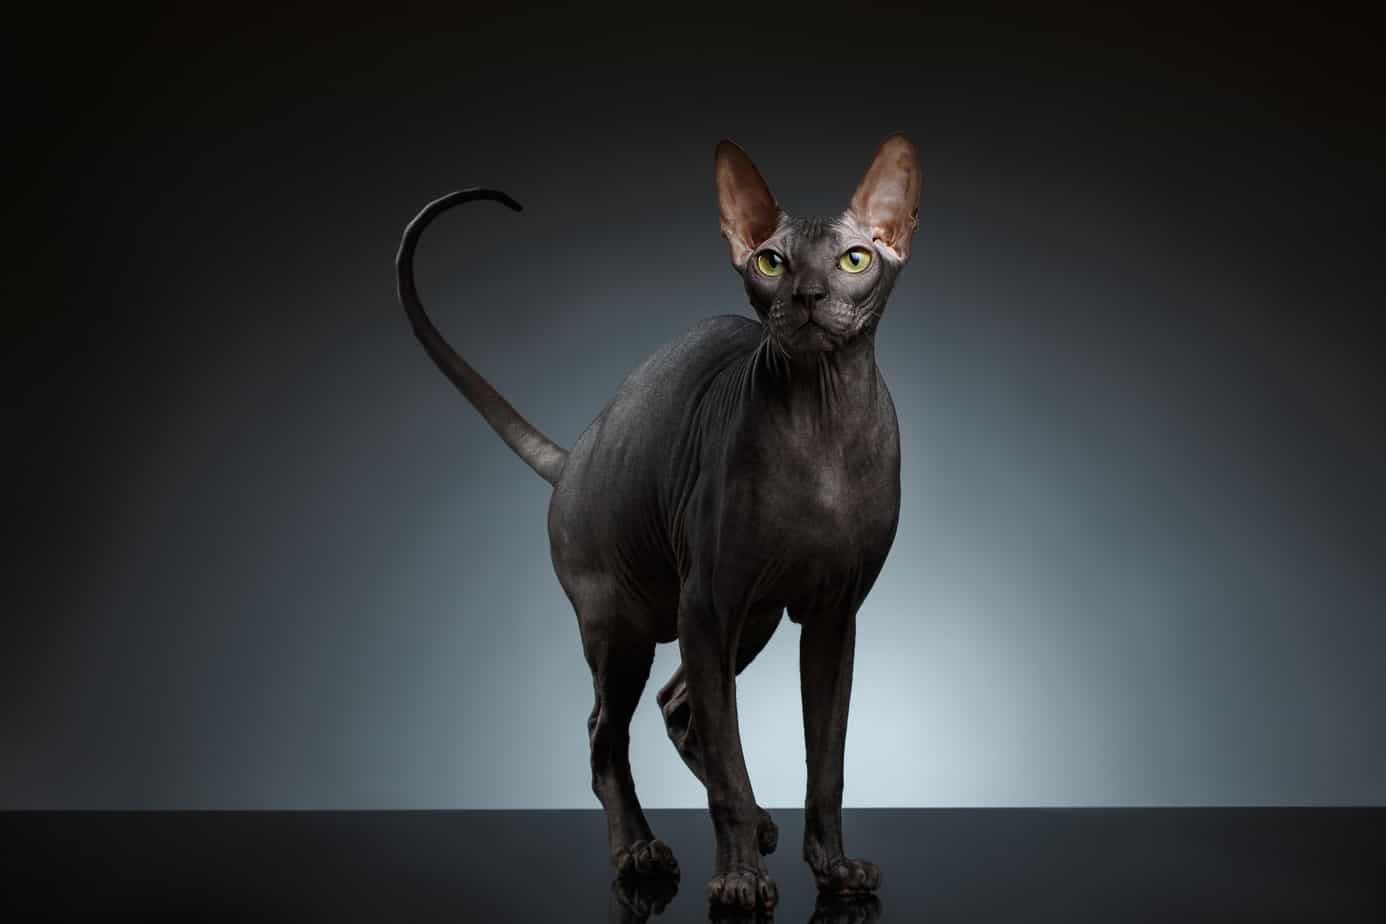 Sphynx Cat Stands and squints Looking up on Black